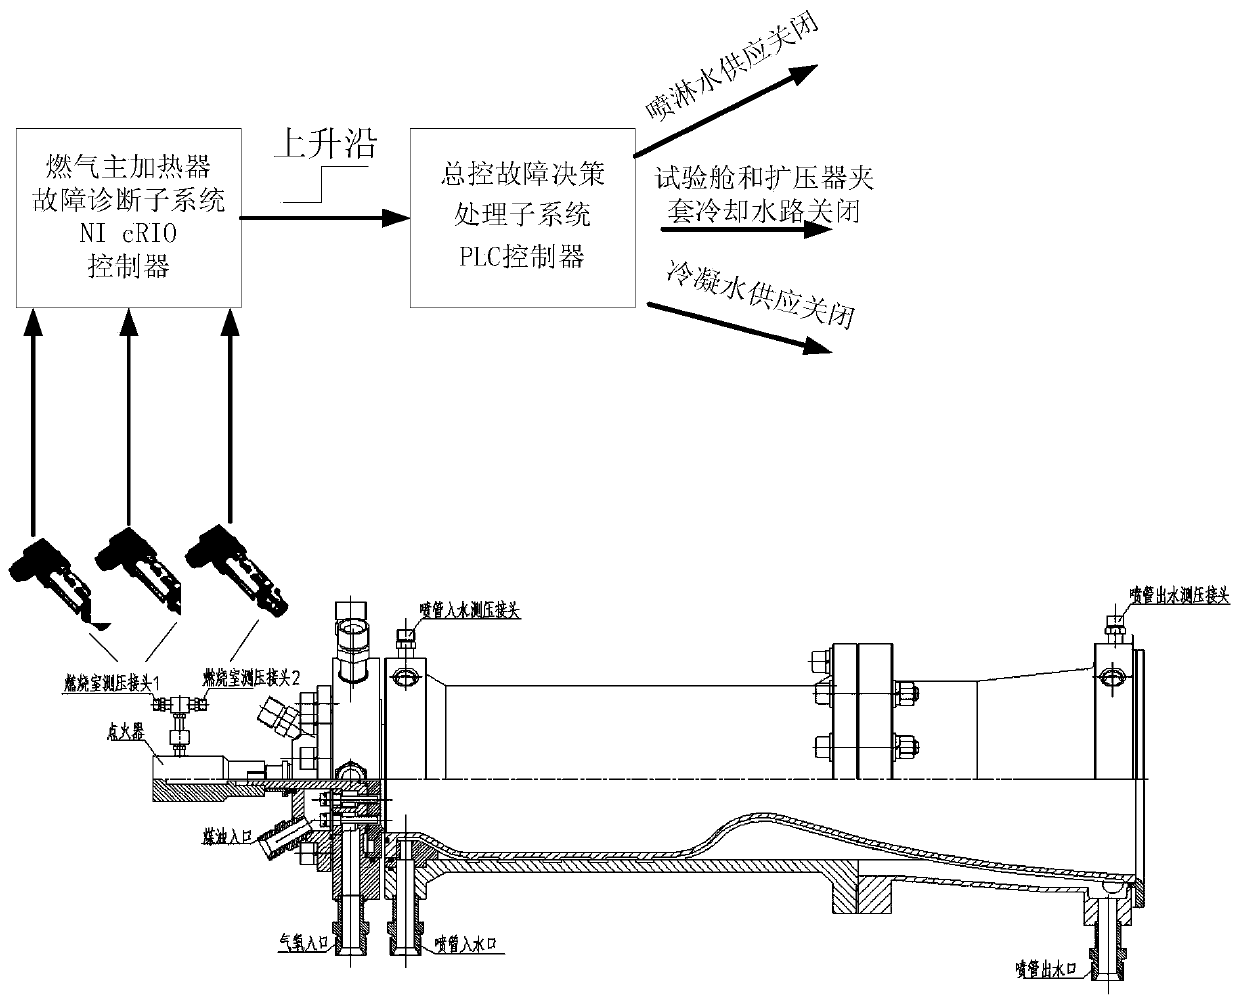 A Wind Tunnel Operation Fault Diagnosis System Based on Distributed Architecture